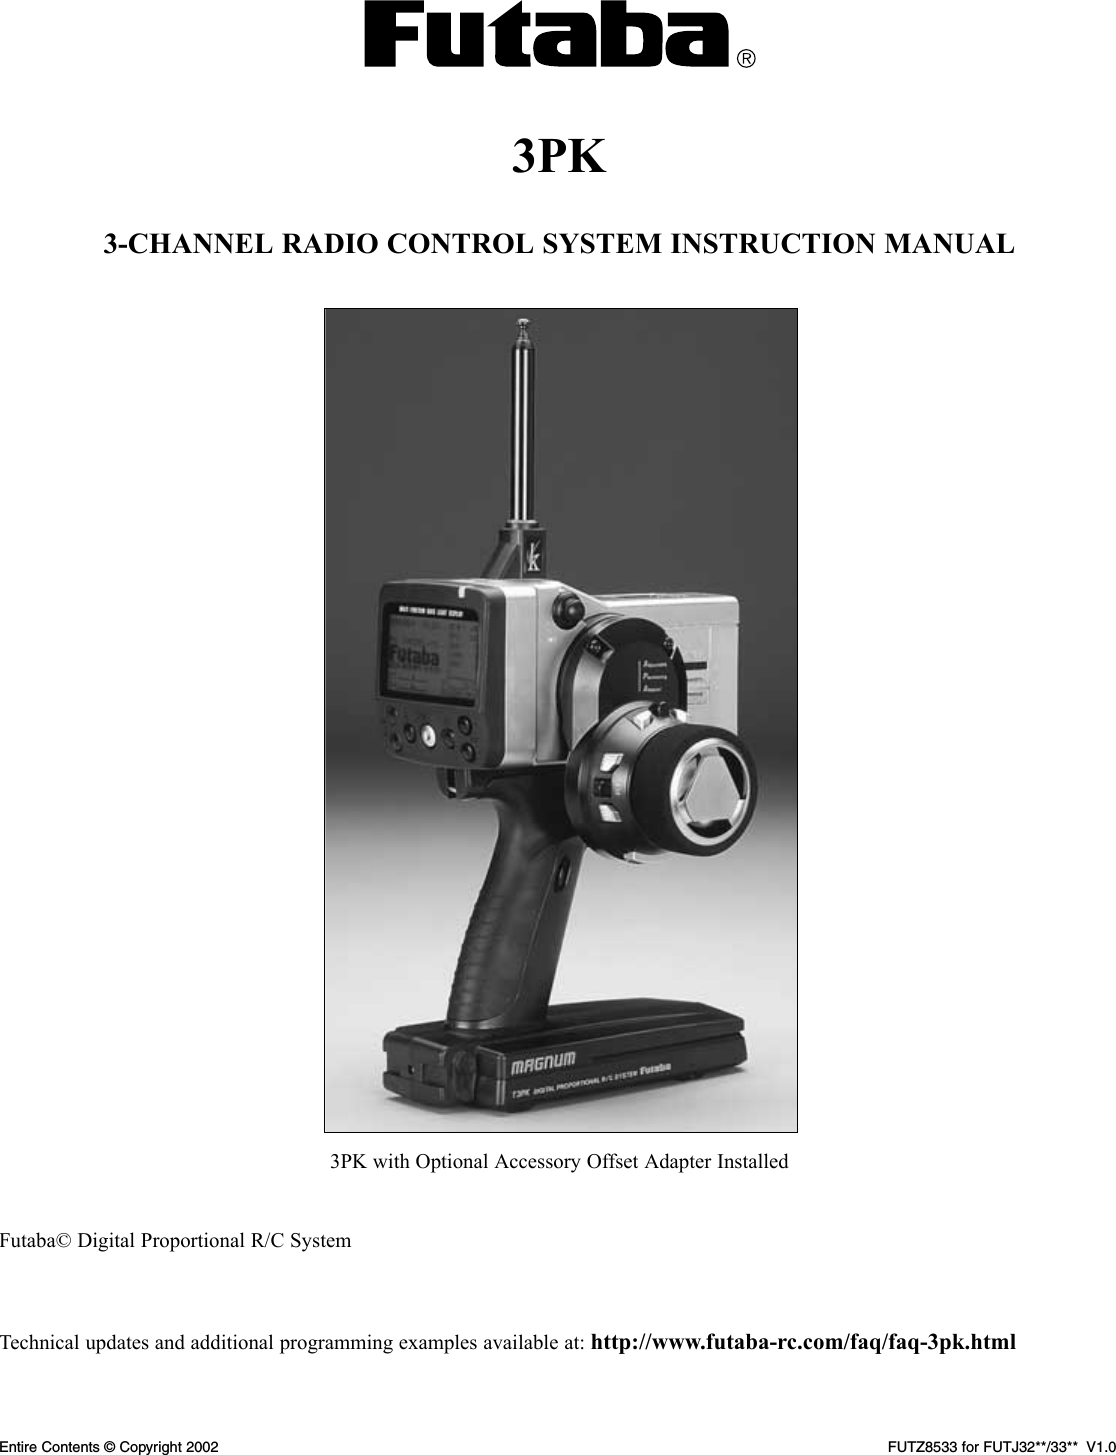 3PK3-CHANNEL RADIO CONTROL SYSTEM INSTRUCTION MANUALFutaba© Digital Proportional R/C SystemTechnical updates and additional programming examples available at: http://www.futaba-rc.com/faq/faq-3pk.htmlFUTZ8533 for FUTJ32**/33**  V1.0Entire Contents © Copyright 20023PK with Optional Accessory Offset Adapter Installed